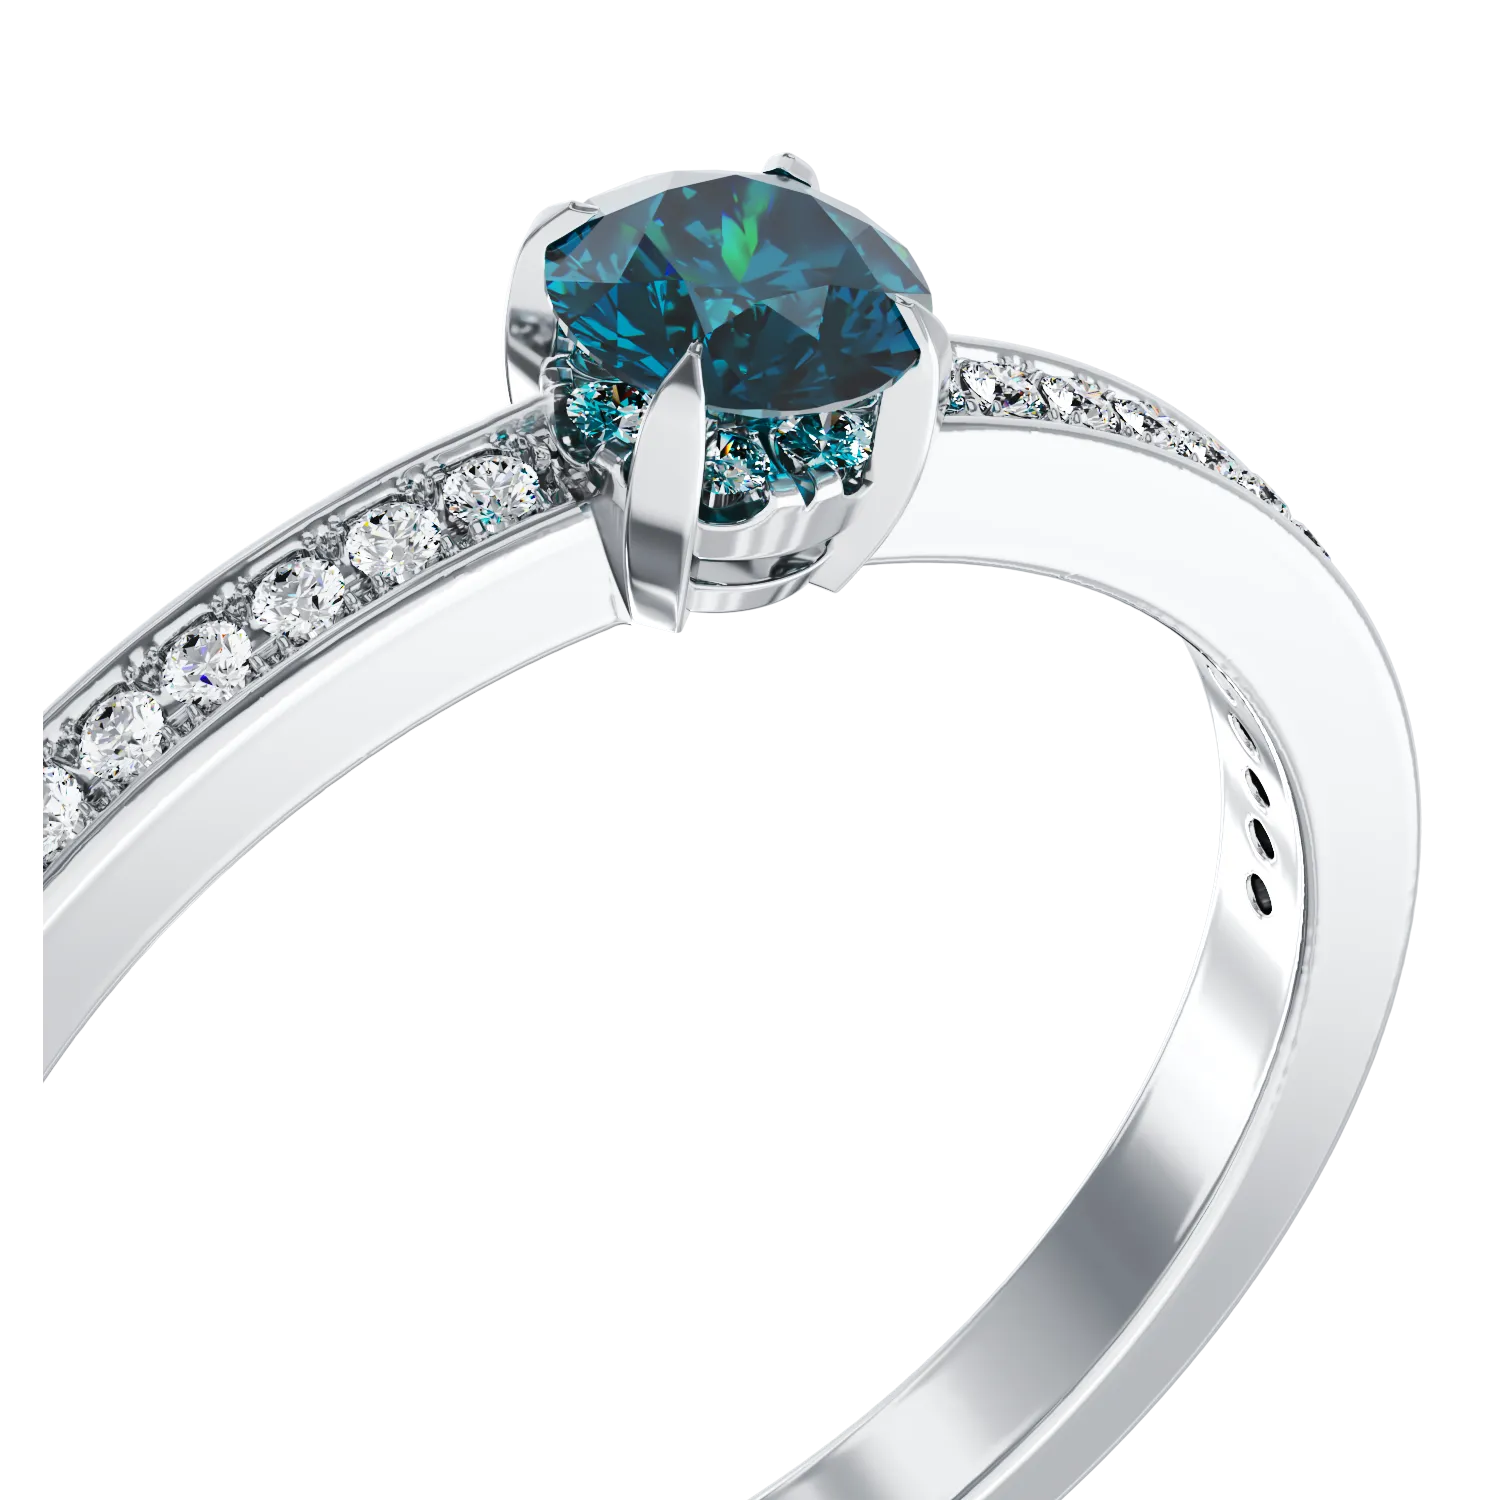 18K white gold engagement ring with 0.32ct blue diamond and 0.19ct Clear diamonds